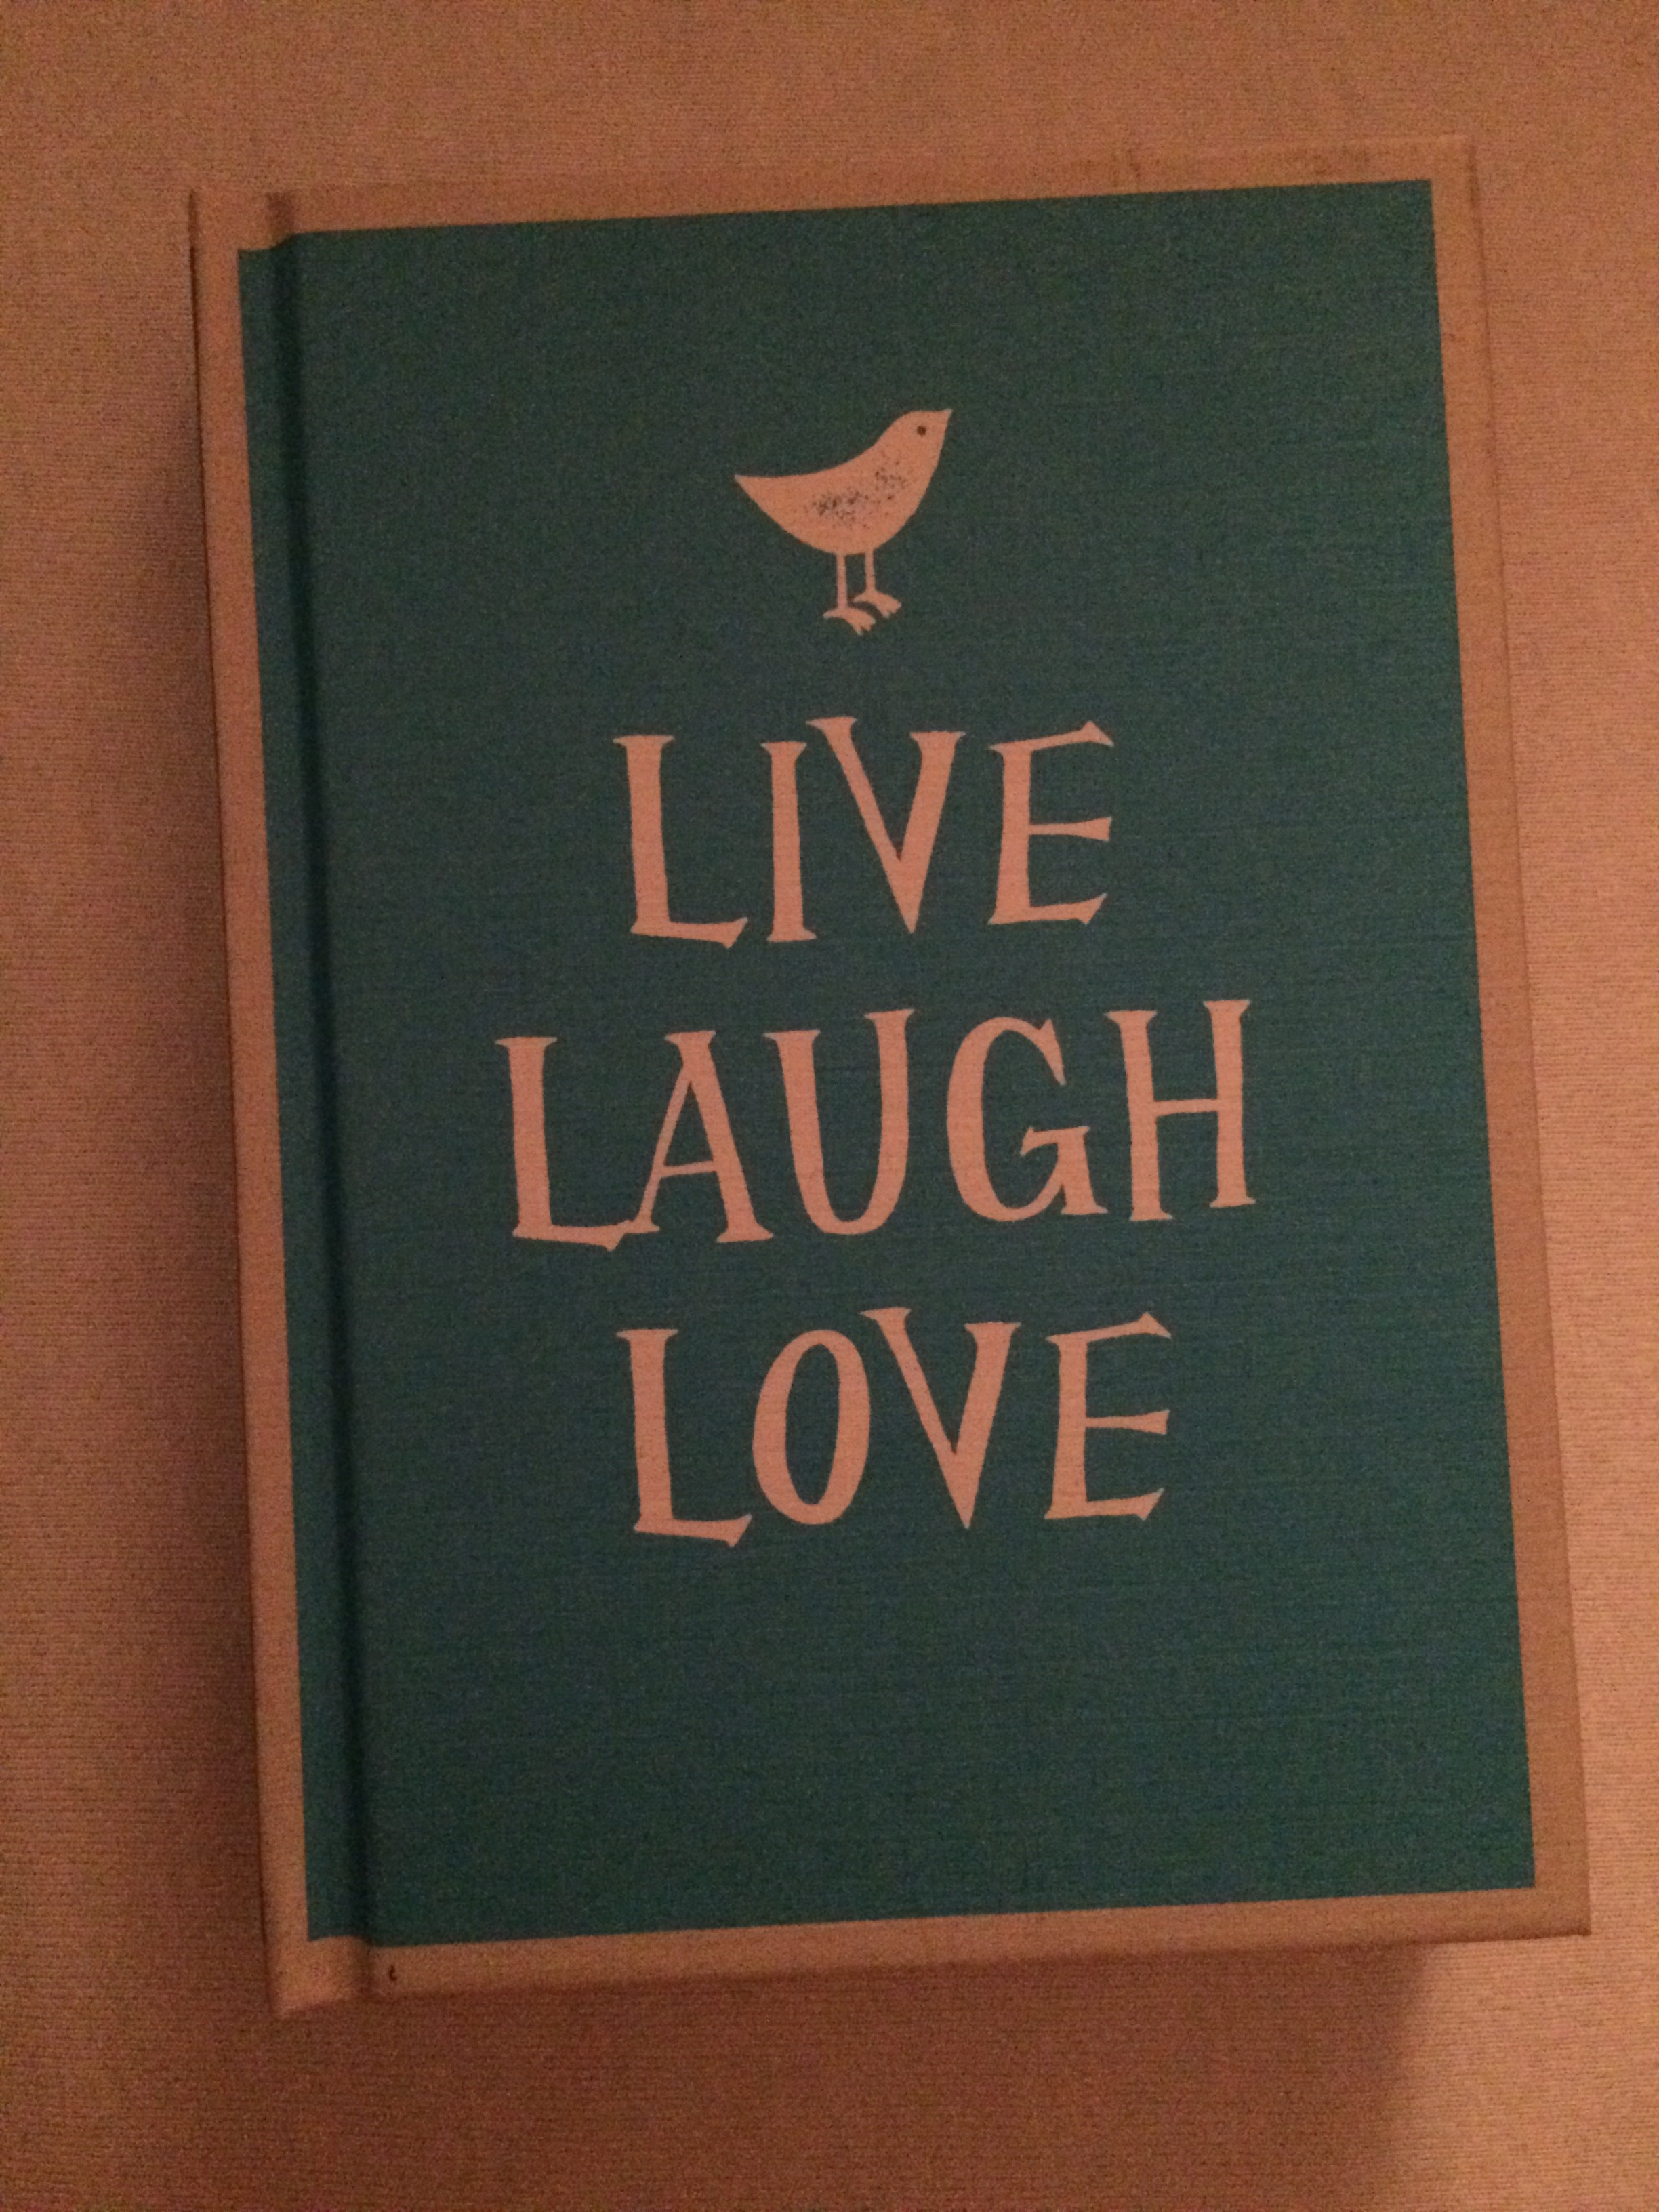 It s called Live Laugh Love It s a book with a collection of heart warming and sweet saying and canny quotes